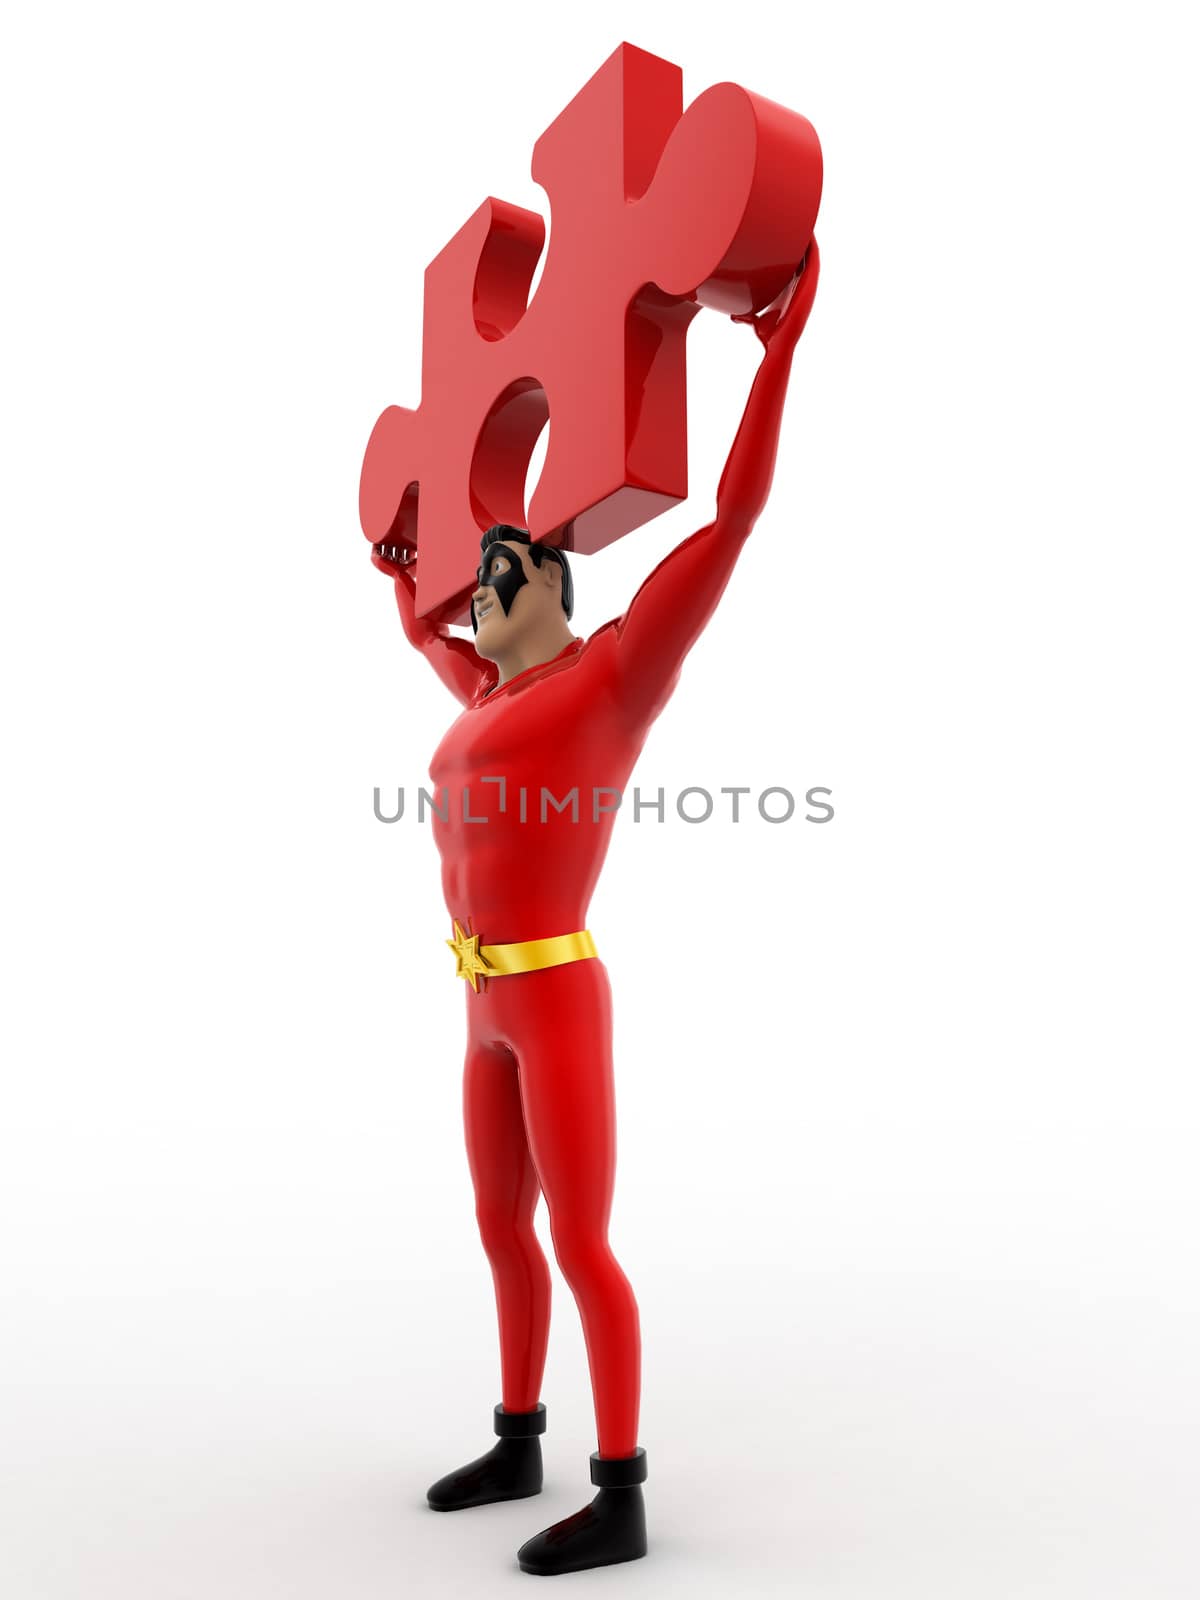 3d superhero holding red jigsaw puzzle piece in hand concept by touchmenithin@gmail.com